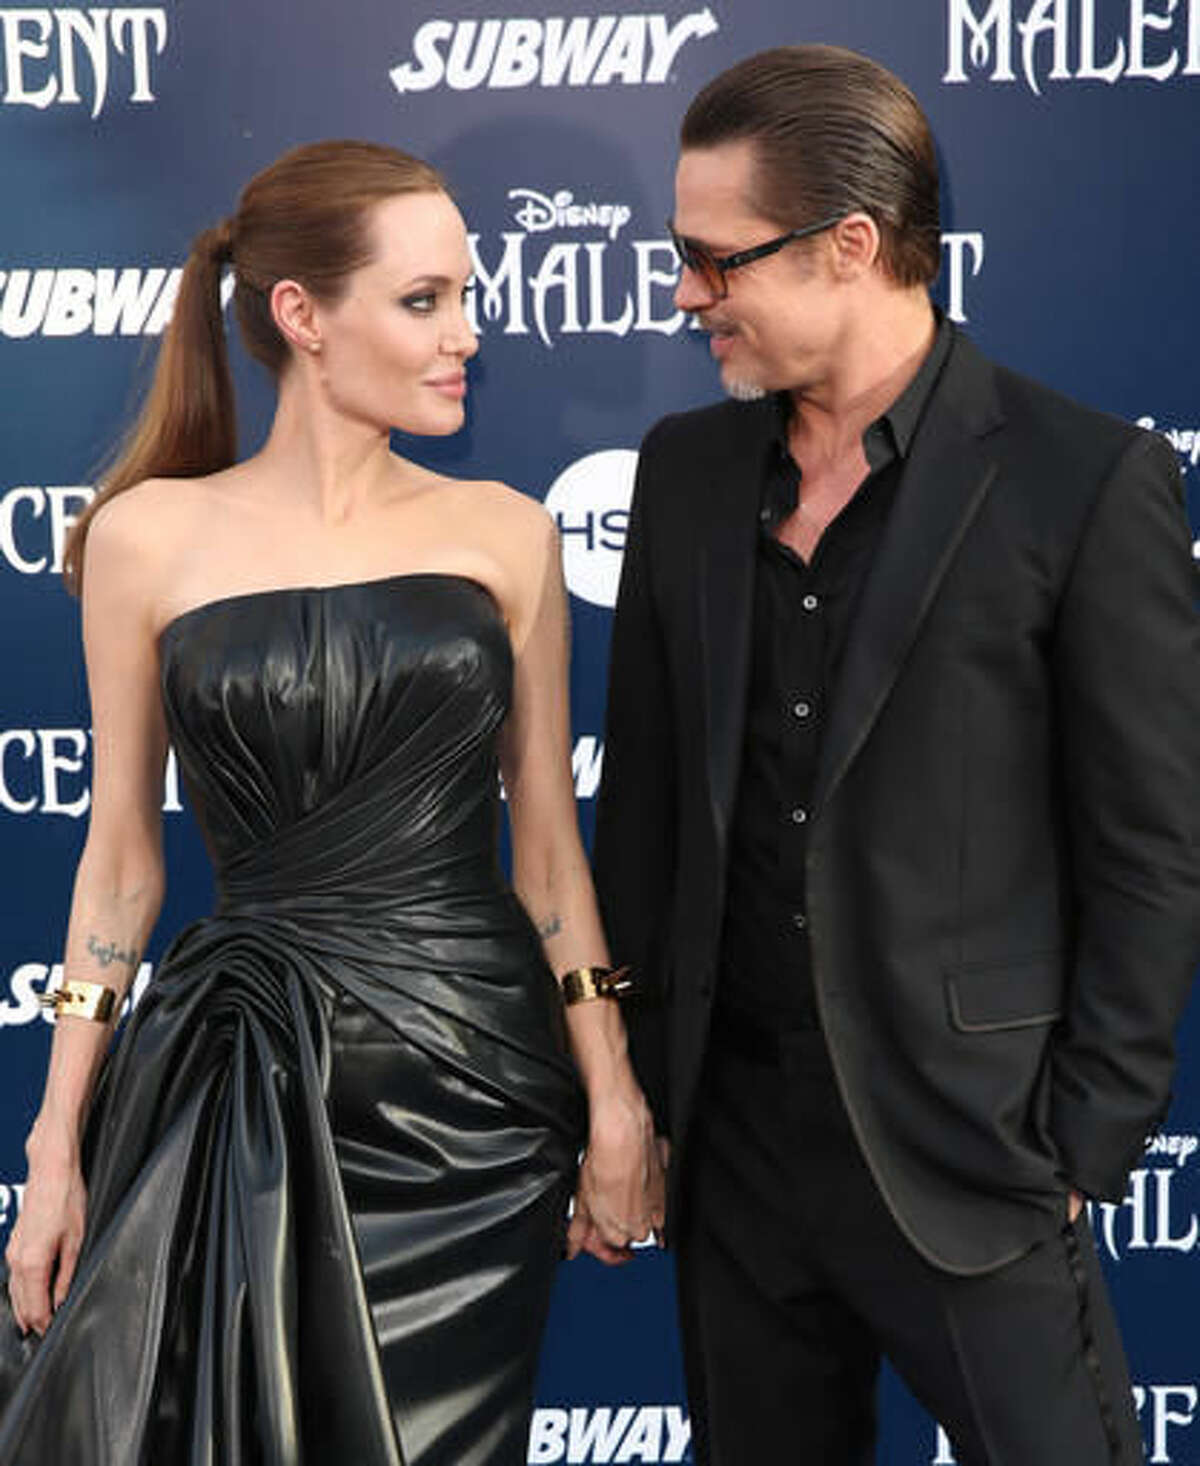 FILE - In this May 28, 2014 file photo, Angelina Jolie and Brad Pitt arrive at the world premiere of "Maleficent" in Los Angeles. Angelina Jolie Pitt has filed for divorce from Brad Pitt, bringing an end to one of the world's most star-studded, tabloid-generating romances. An attorney for Jolie Pitt, Robert Offer, said Tuesday, Sept. 20, 2016, that she has filed for the dissolution of the marriage. (Photo by Matt Sayles/Invision/AP, File)